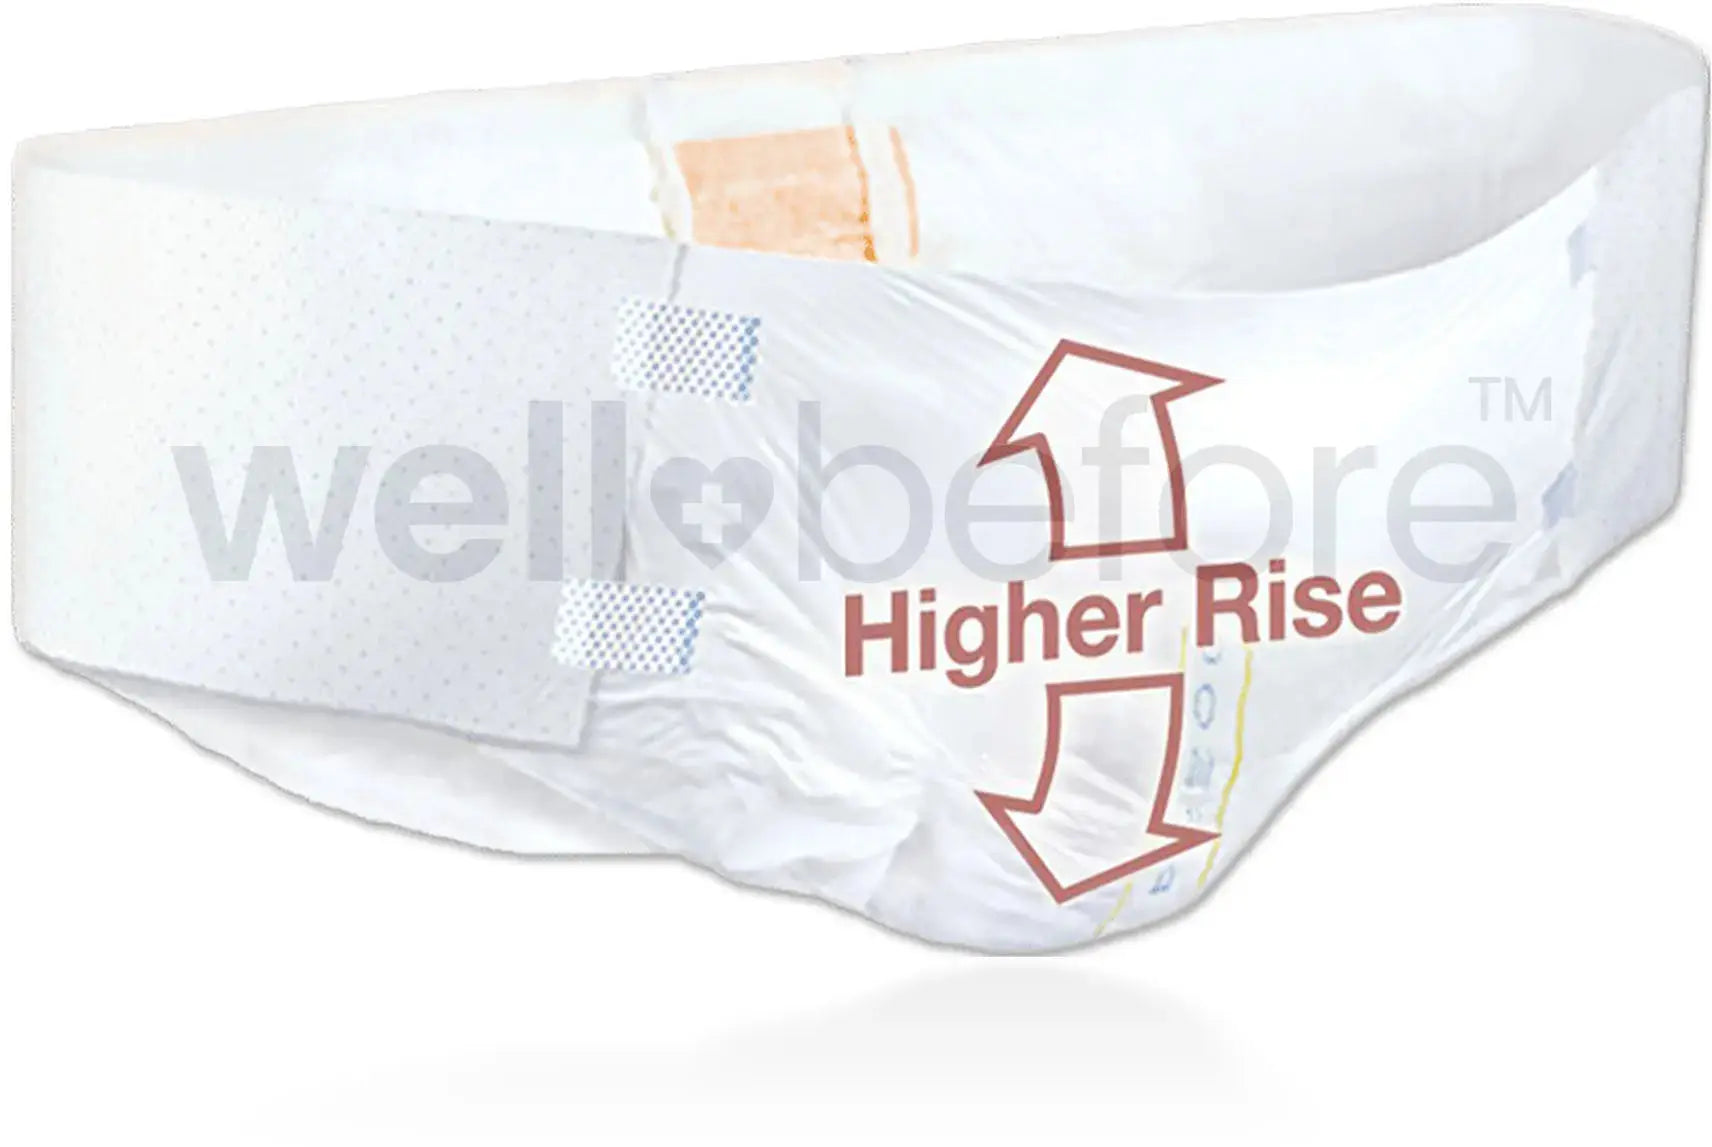 Tranquility AIR-Plus Bariatric Disposable Briefs - Tranquility Products